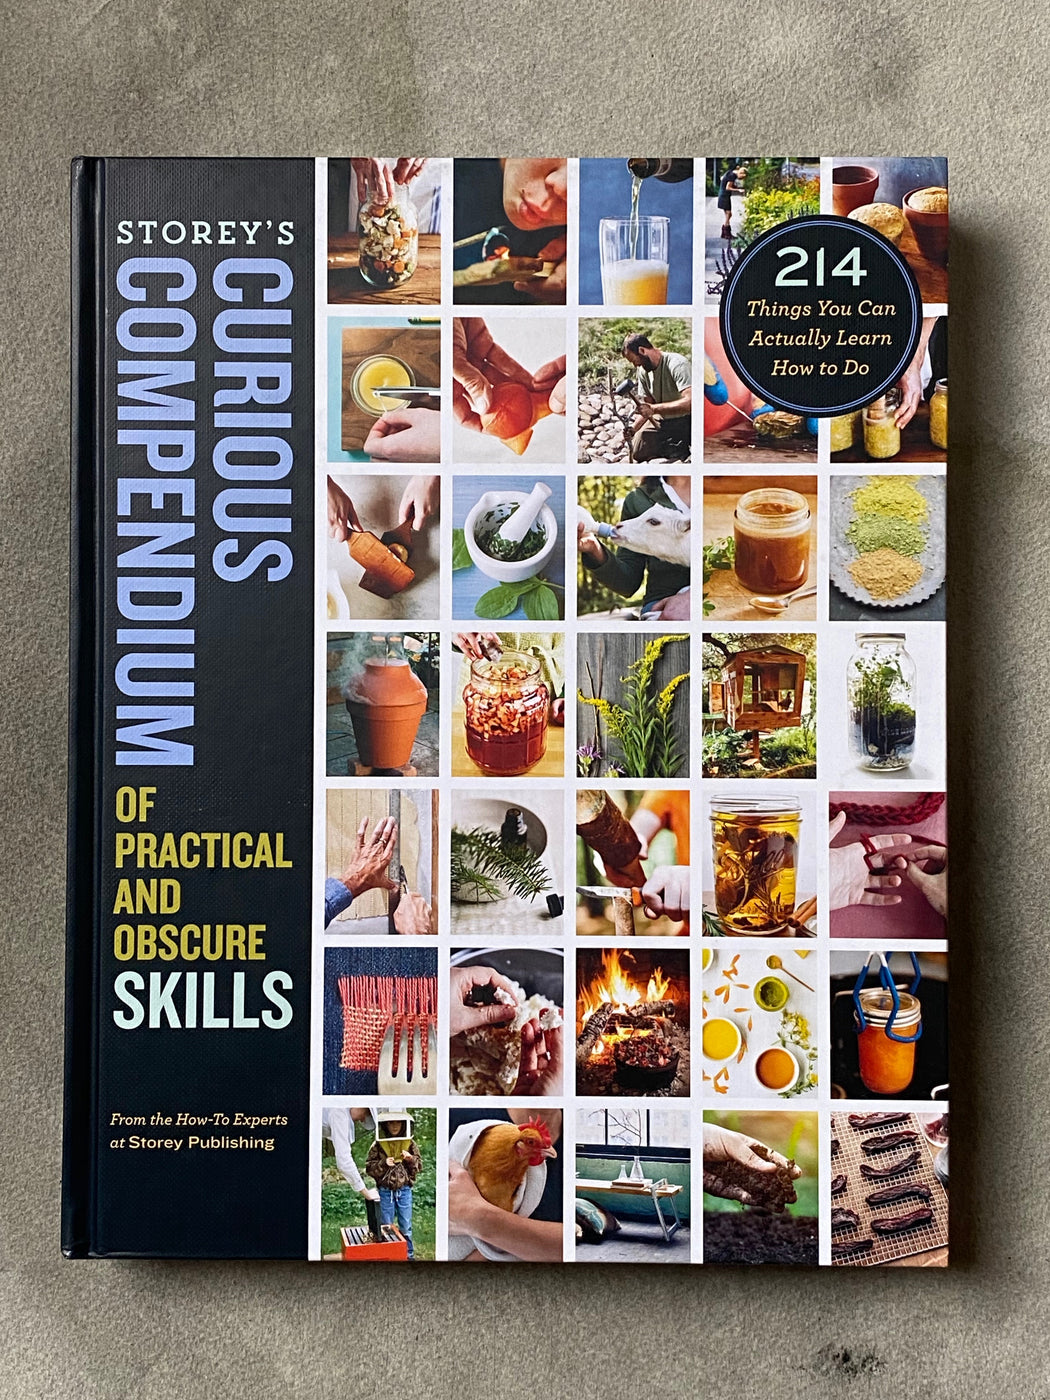 Storey's "Curious Compendium of Practical and Obscure Skills"